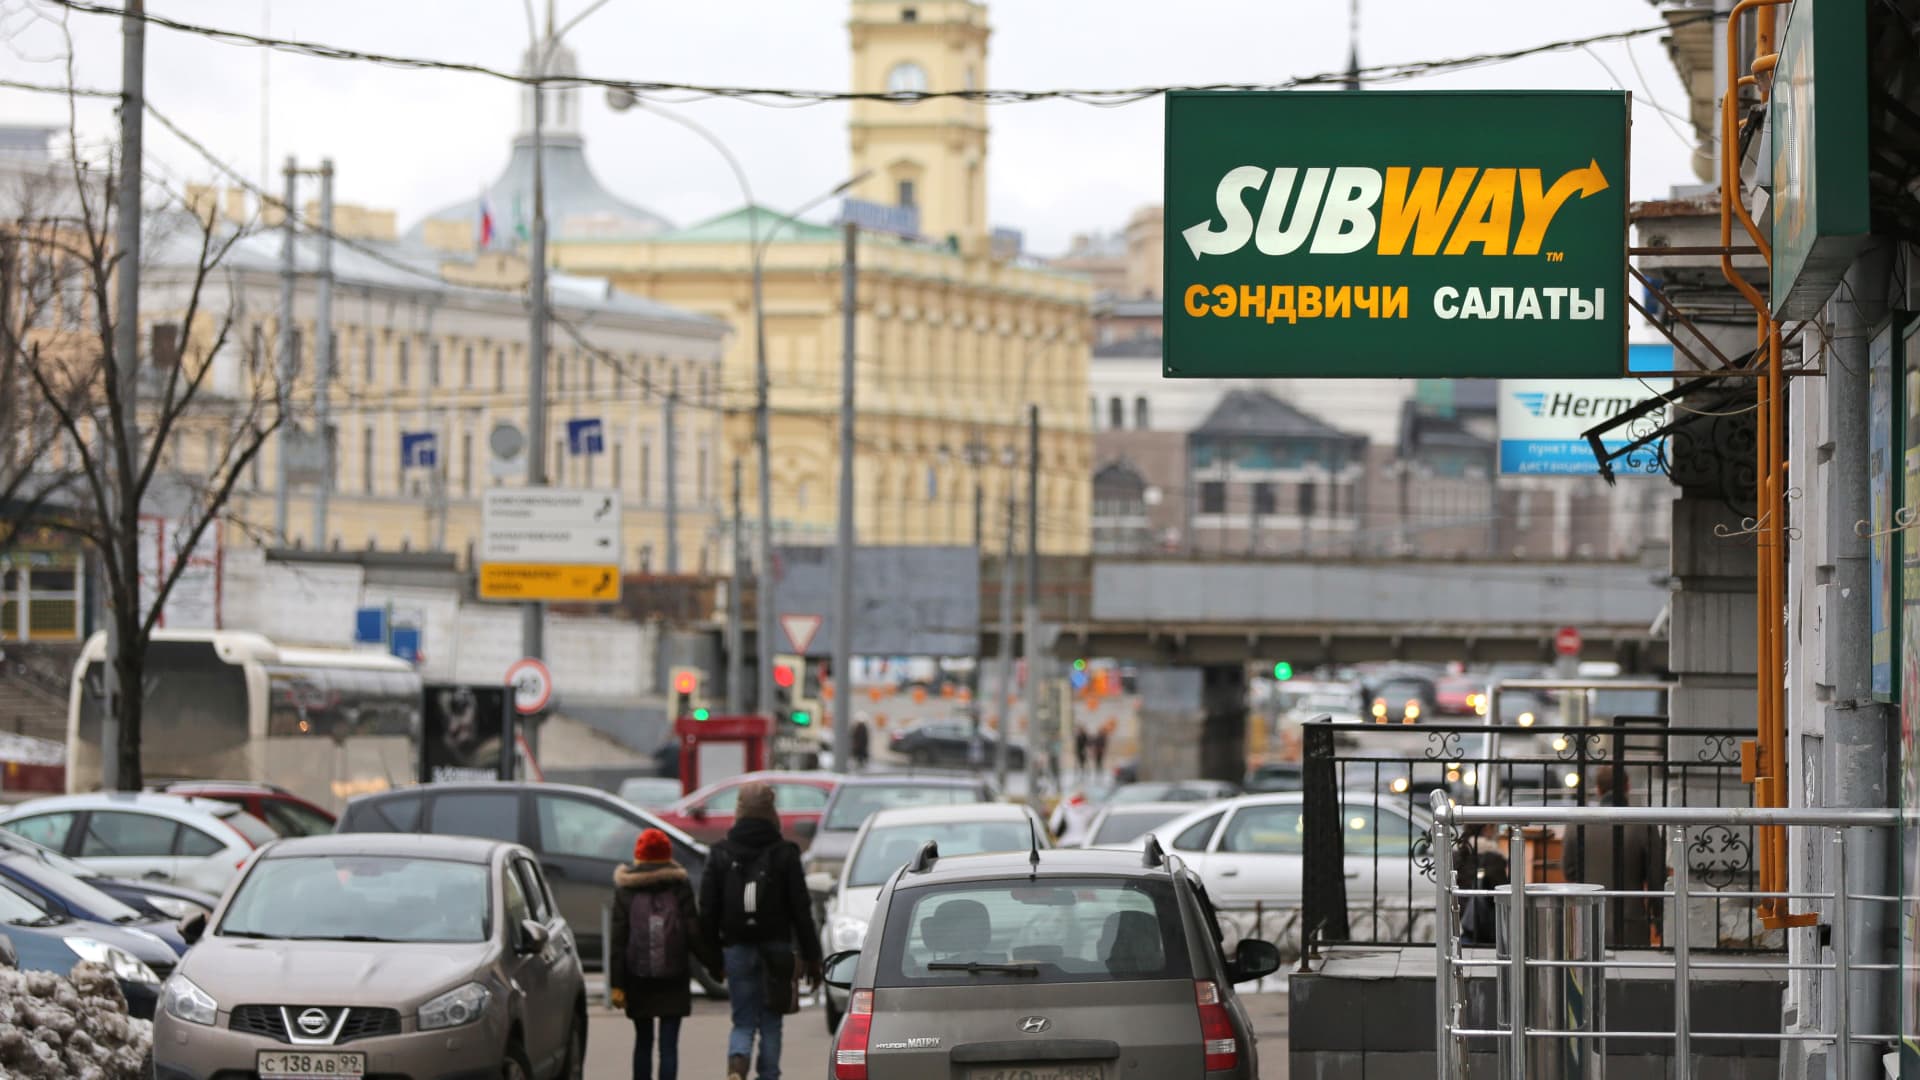 The Subway name appears in Russian on a sign outside a Subway fast food restaurant in Moscow, Russia, on Sunday, April 7, 2013.